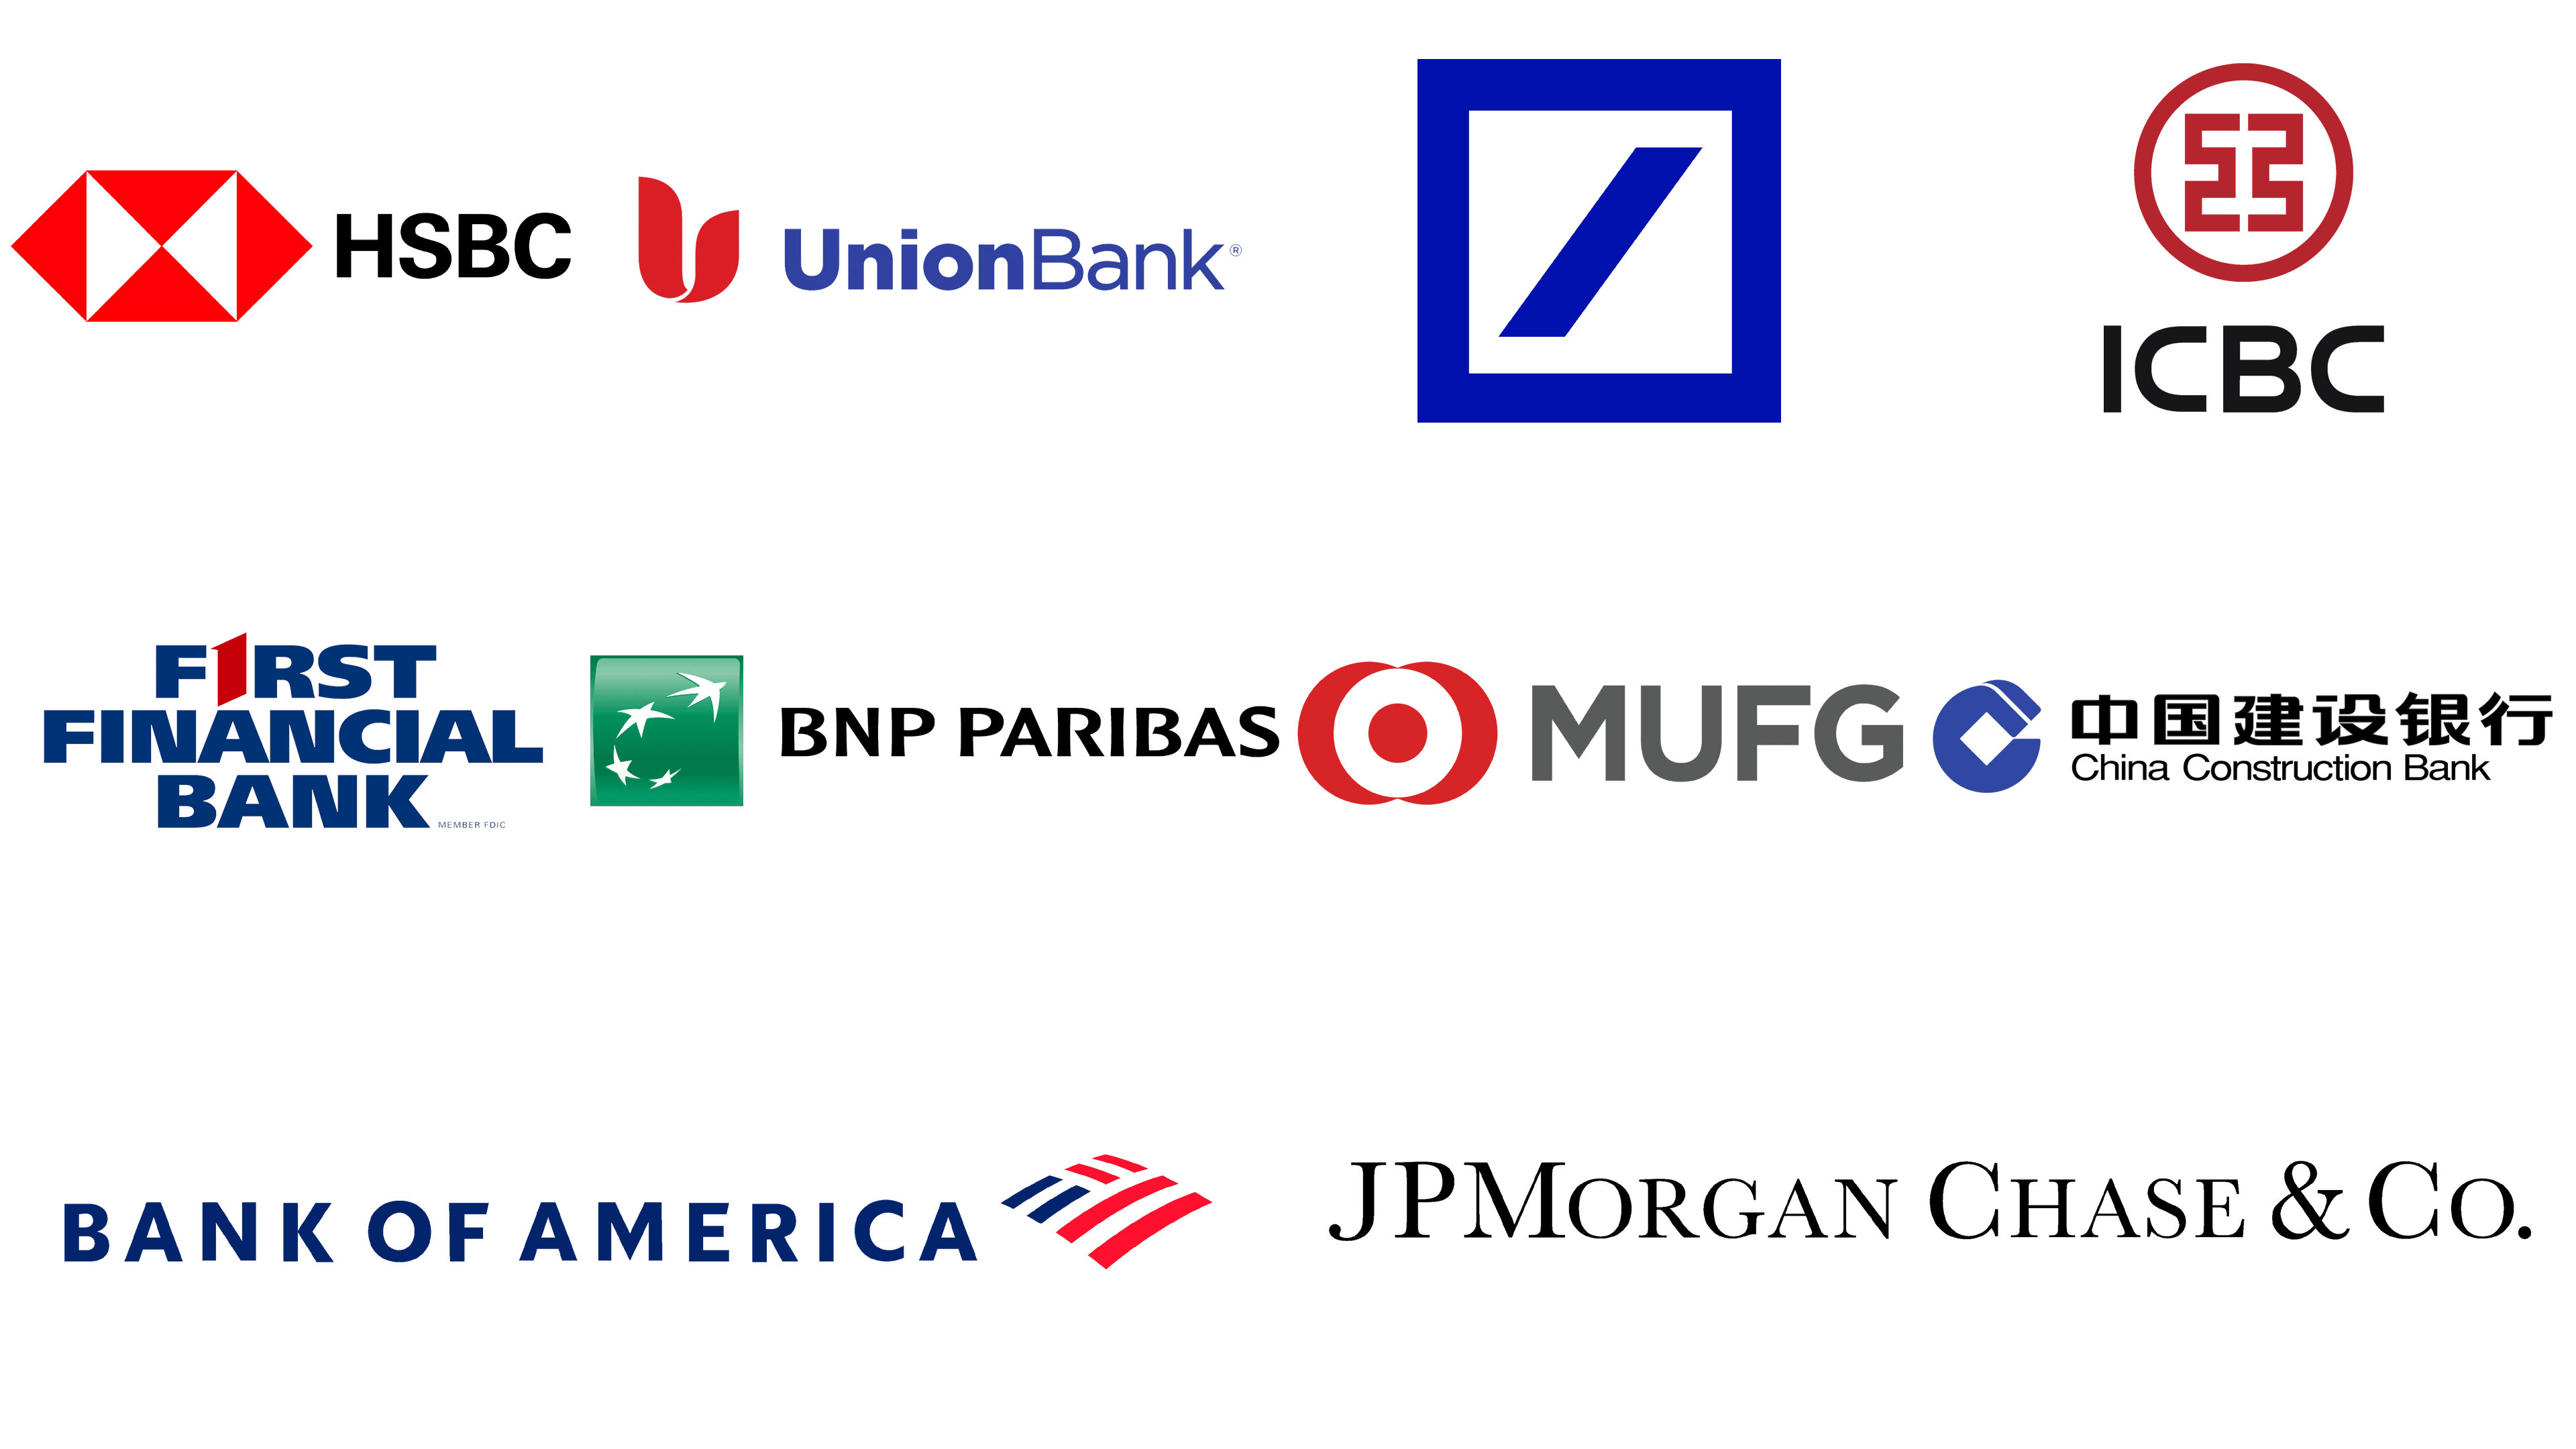 The most popular Bank logos and brands